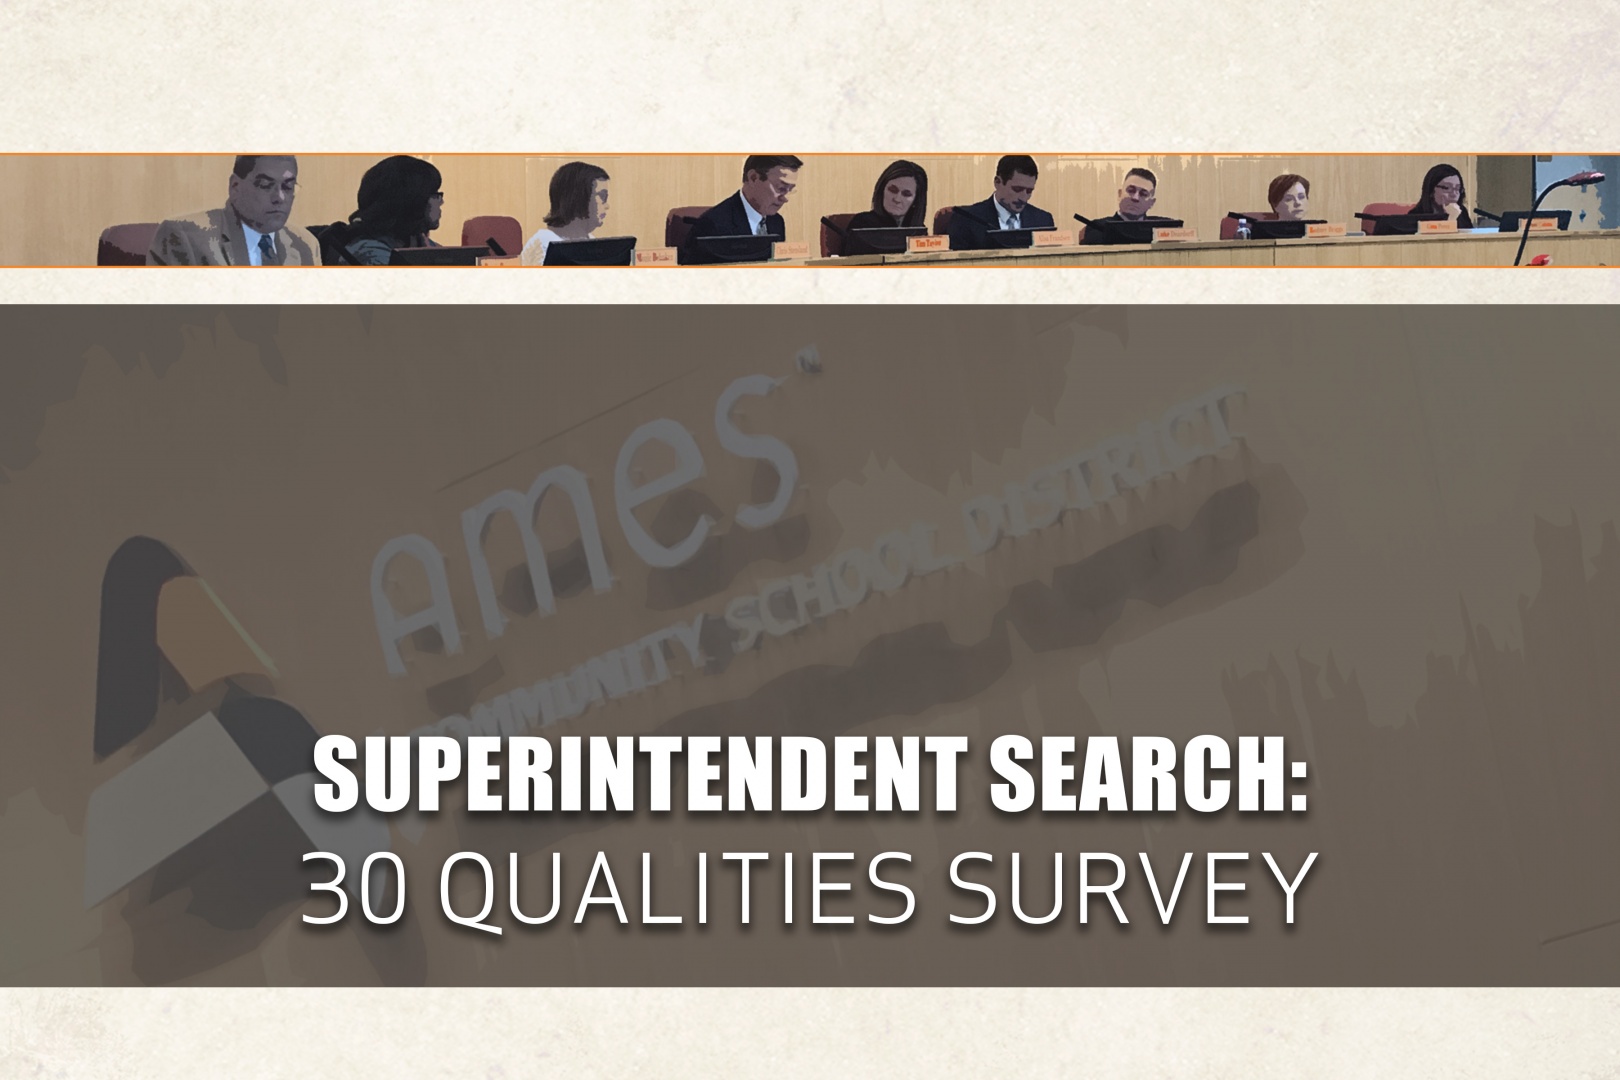 Superintendent Search: 30 Qualities Survey